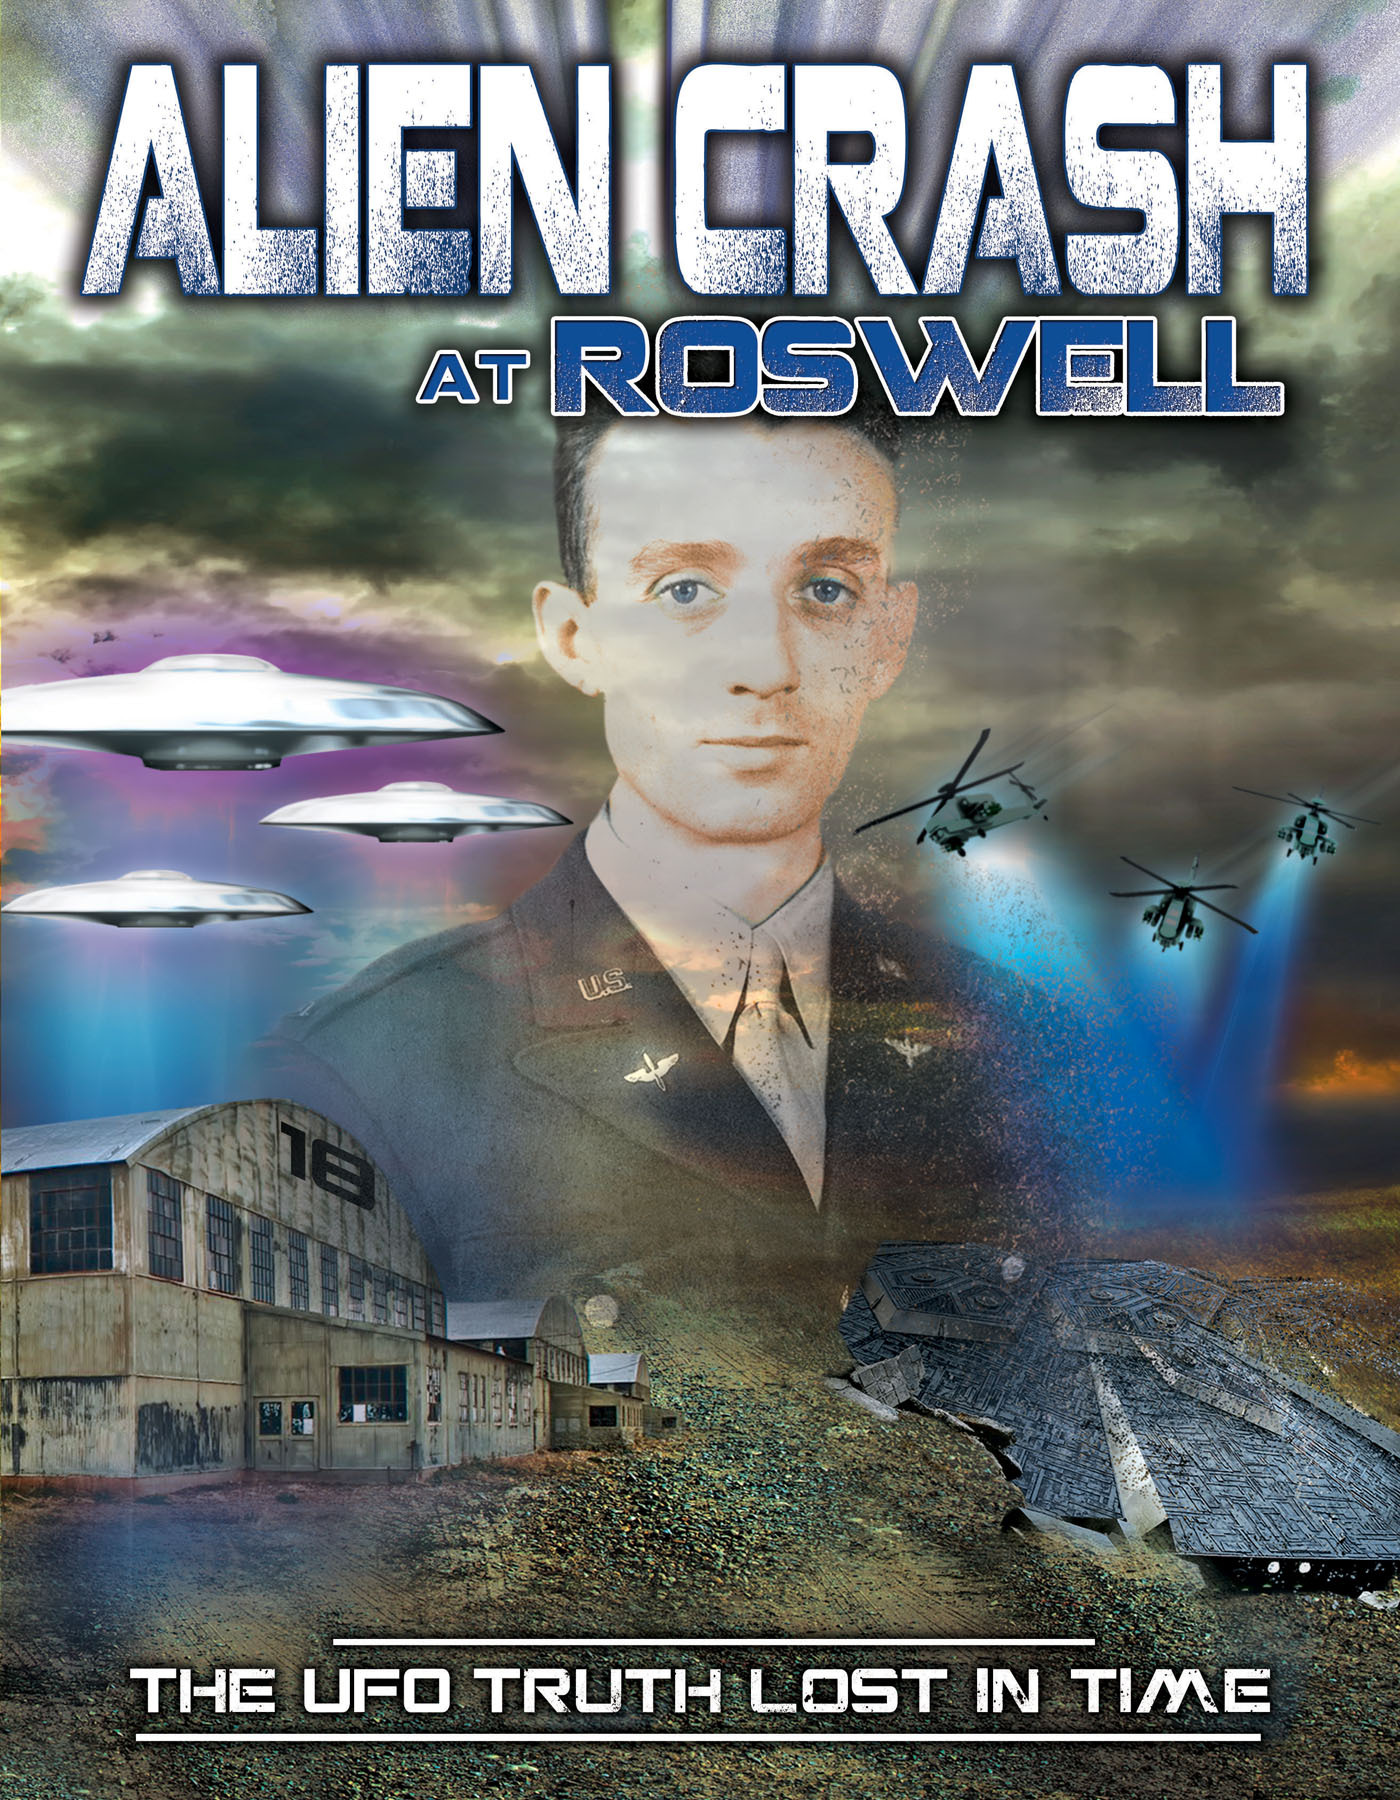 Alien Crash at Roswell: The UFO Truth Lost in Time (2013) starring Philip Coppens on DVD on DVD